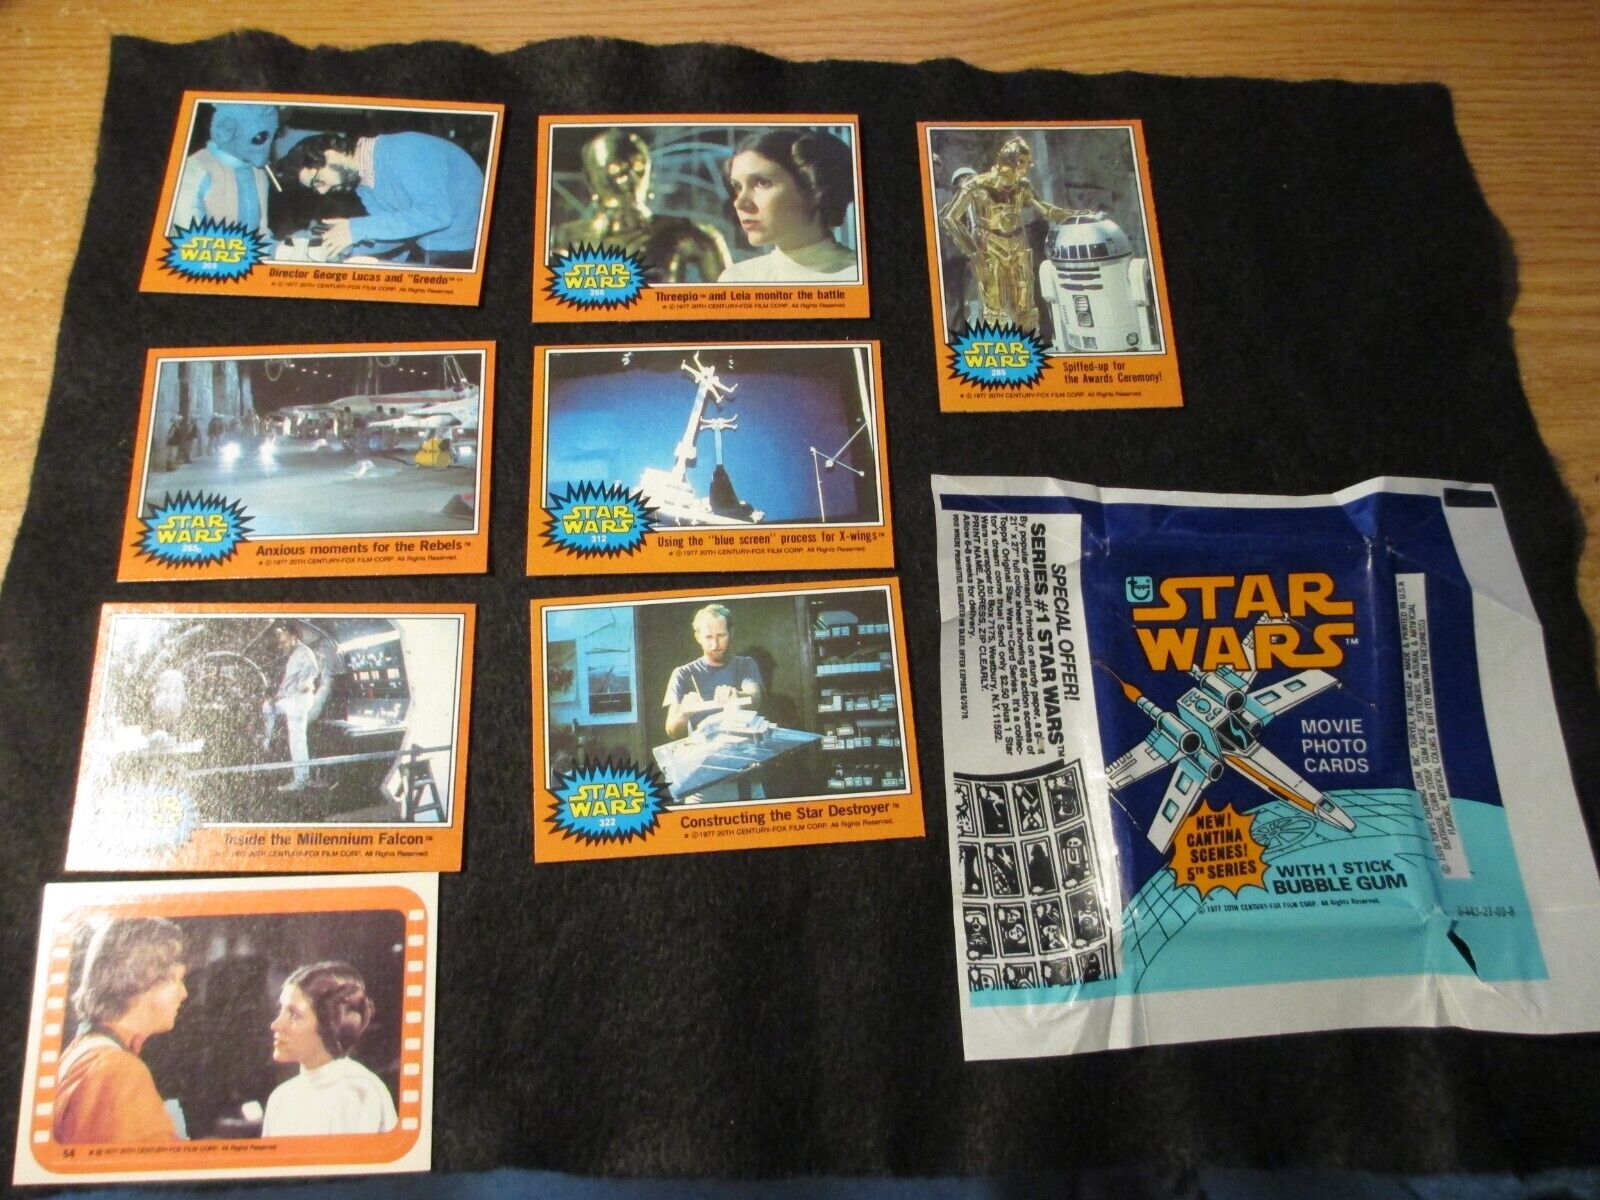 1977 Topps Star Wars Series 5 Lot of 7 Cards, 1 sticker and Wrapper 